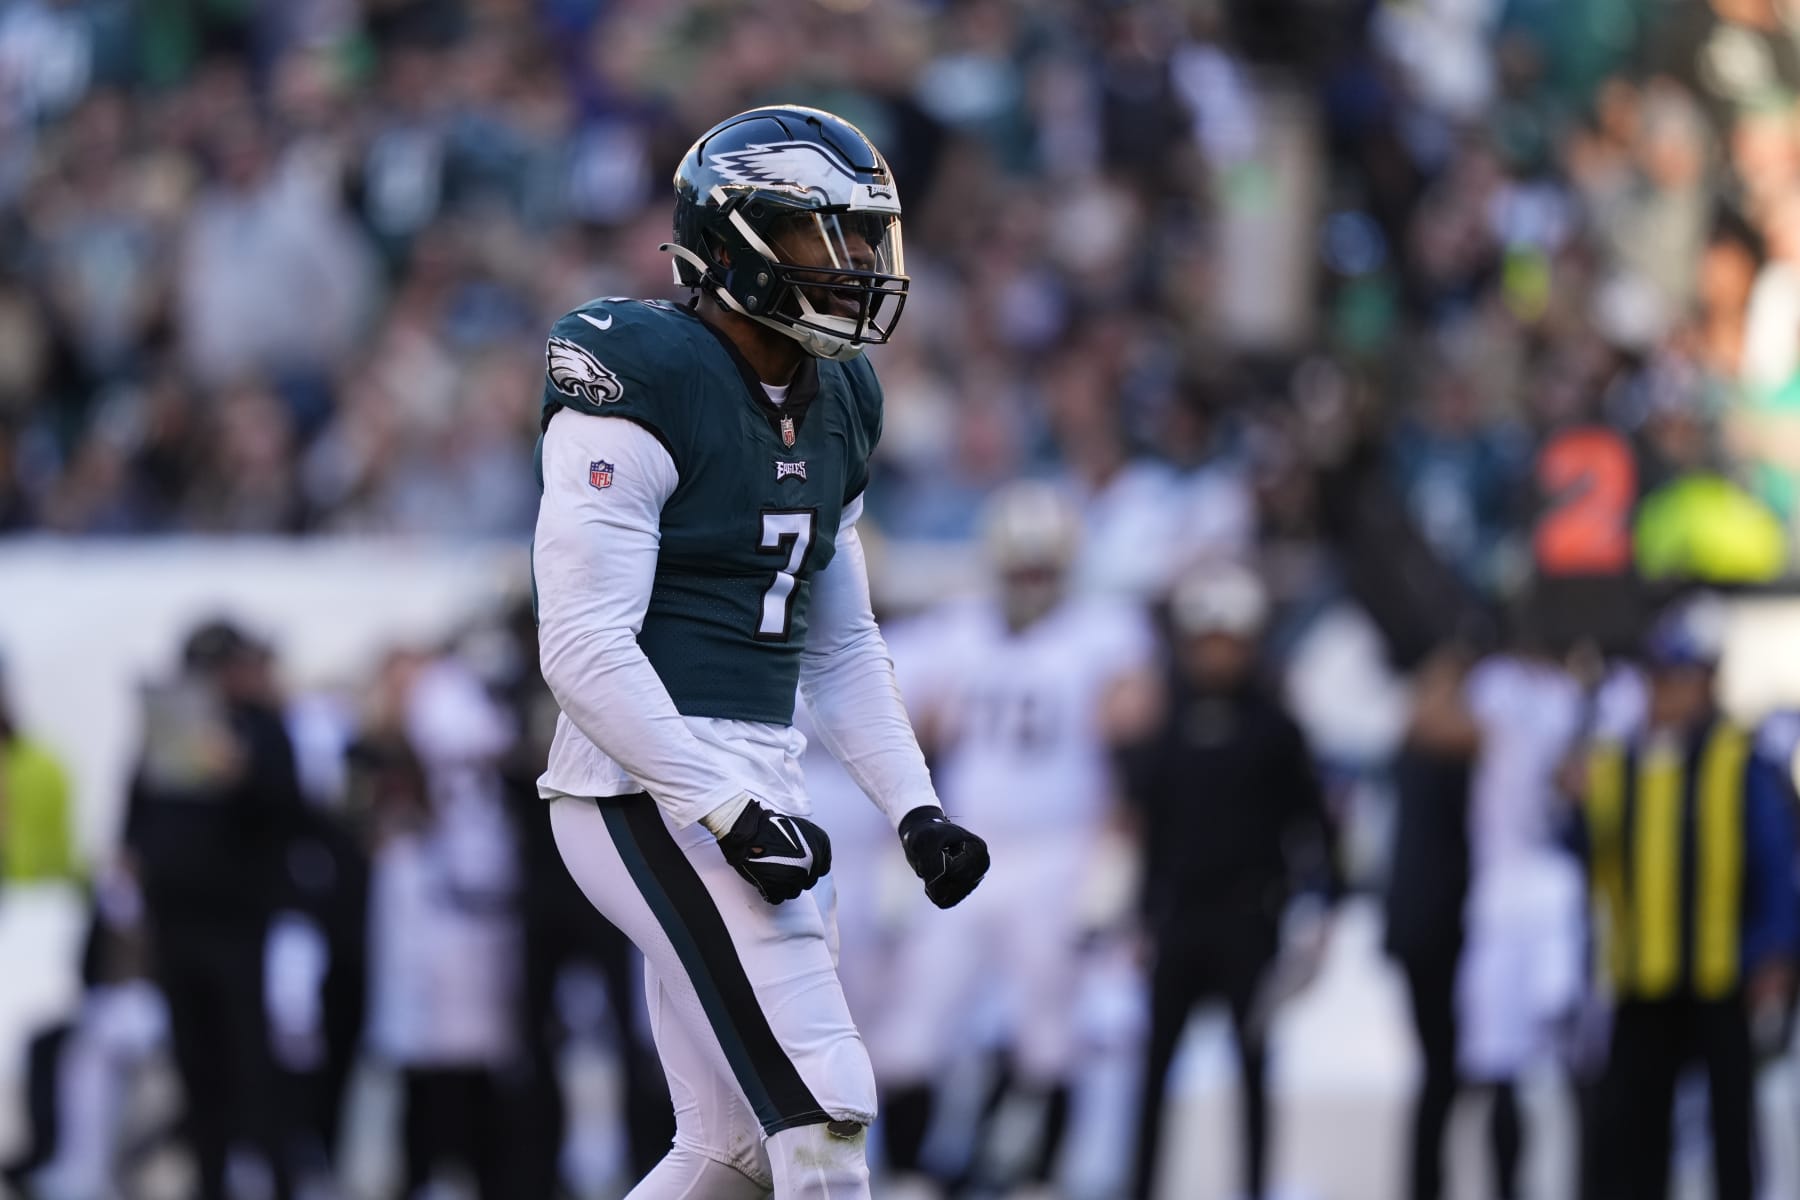 Eagles most to blame for Week 17 loss vs. Saints